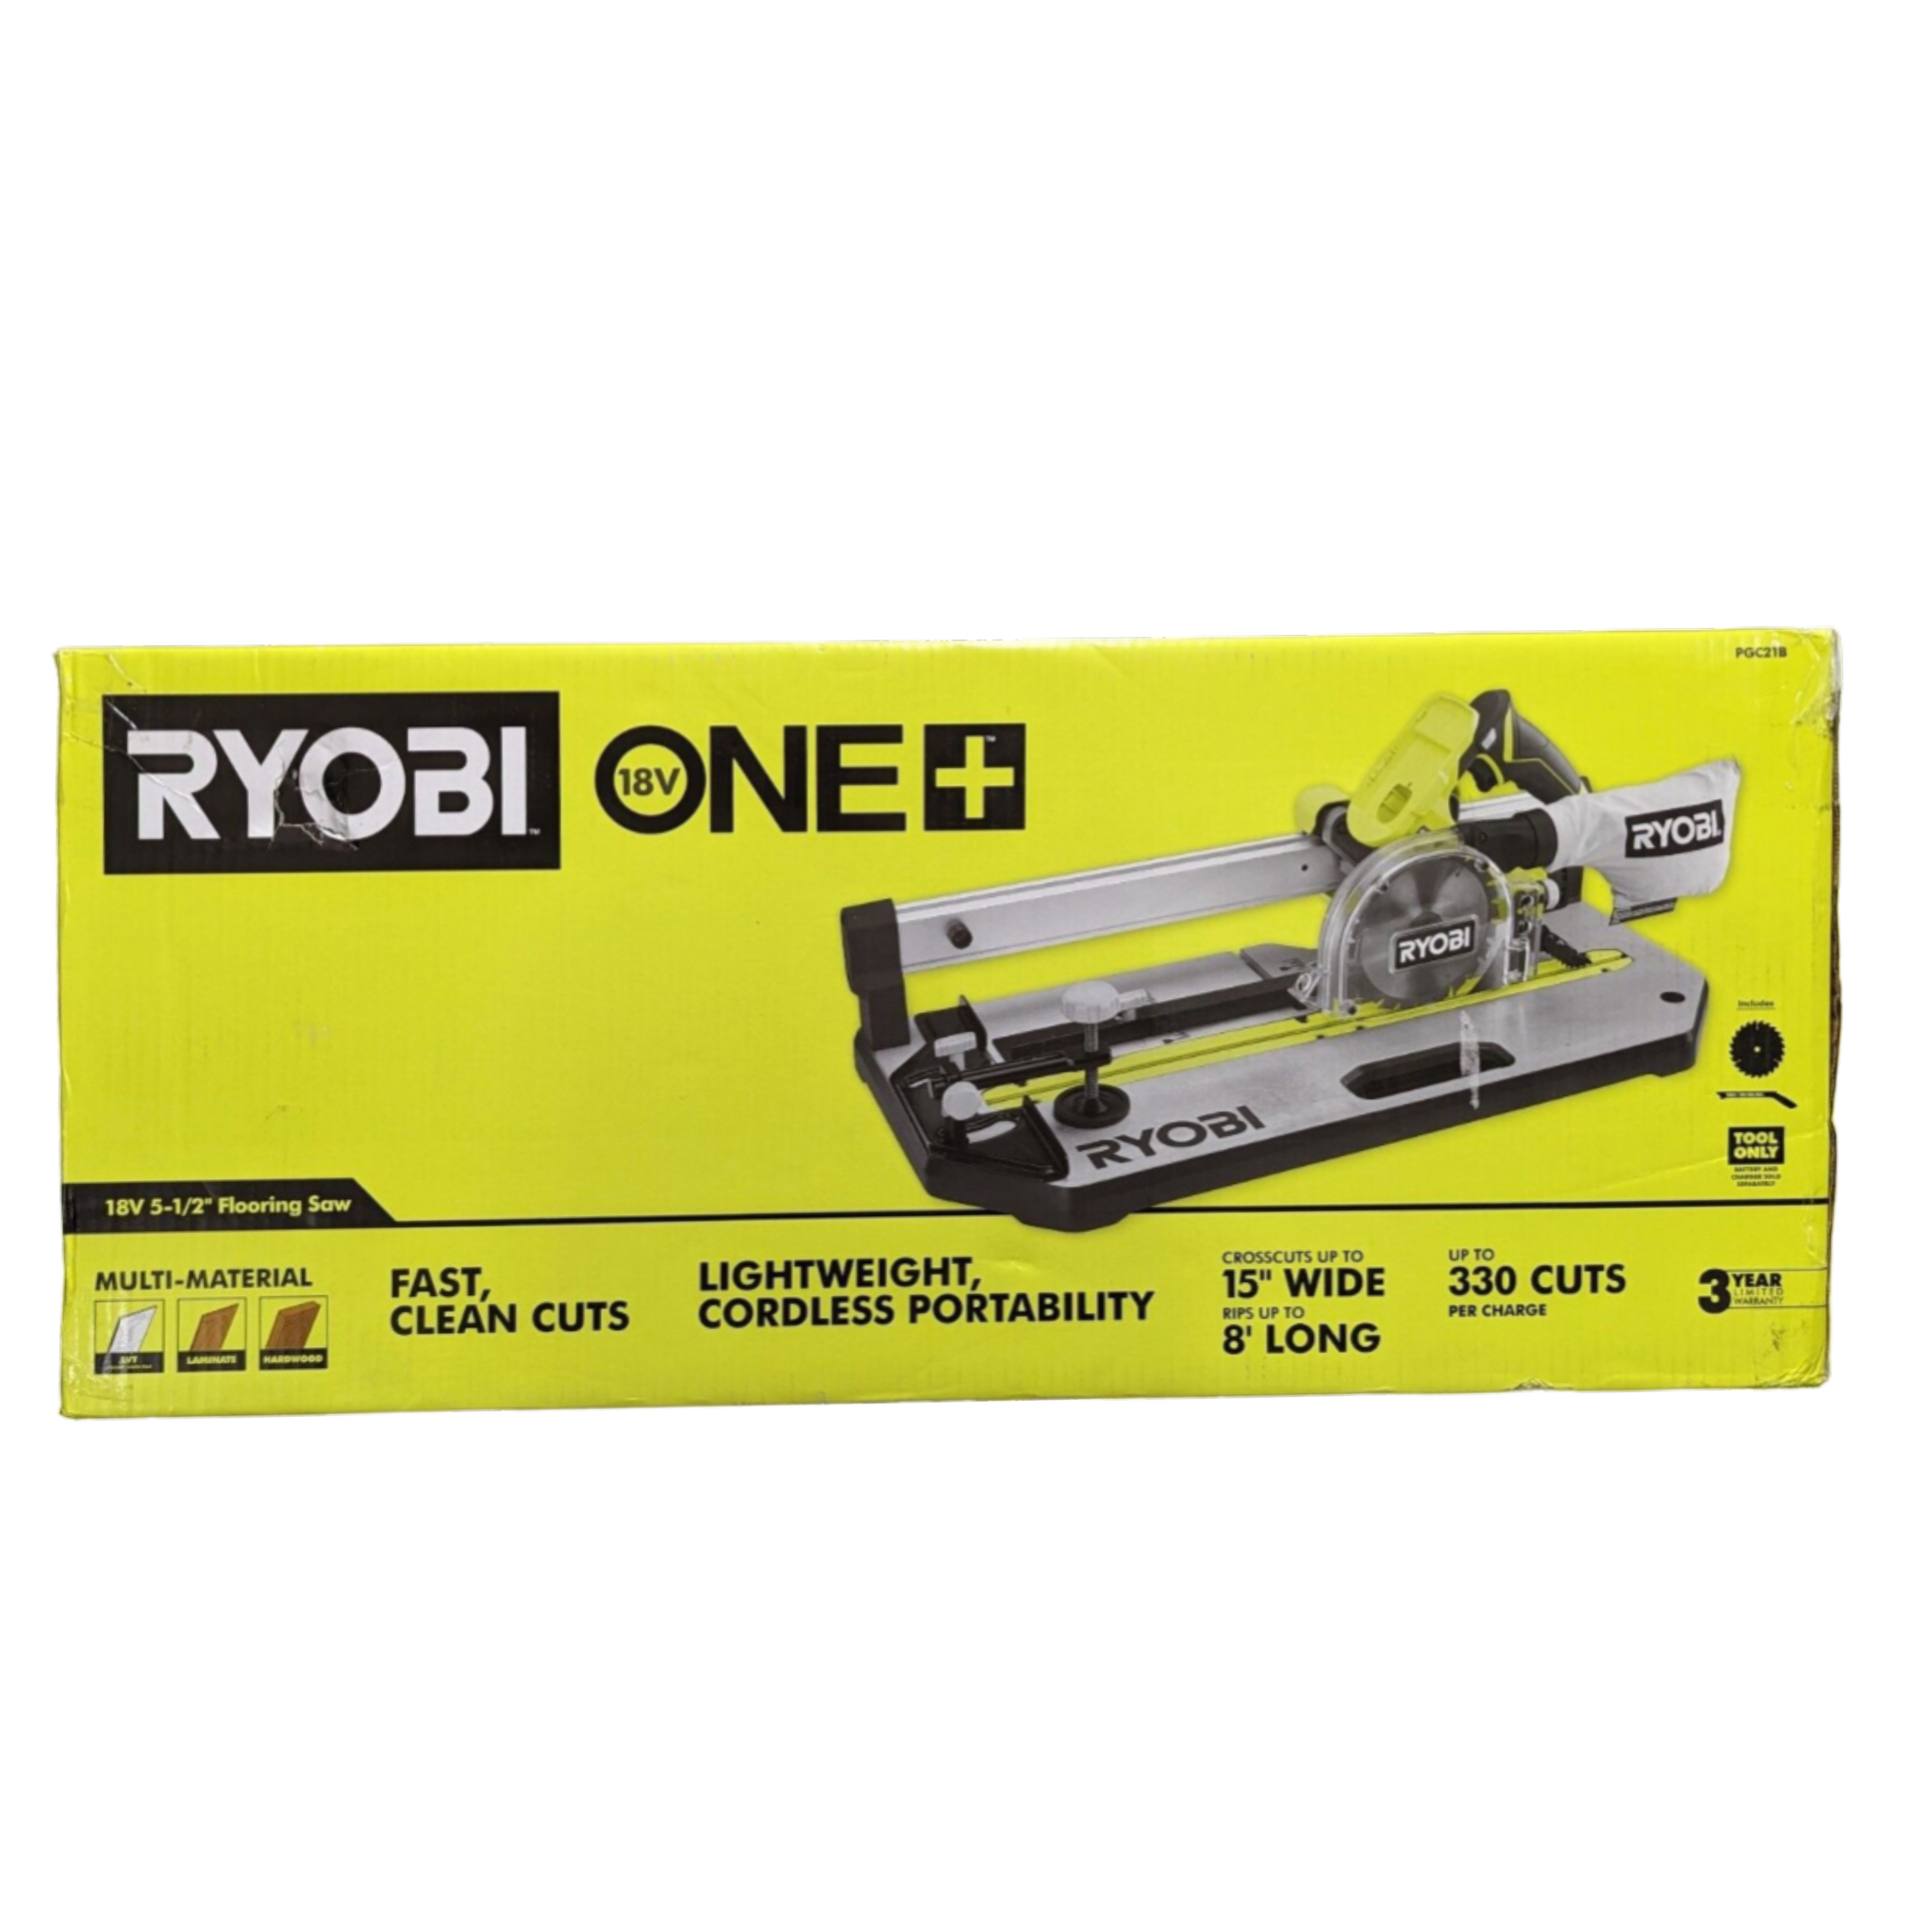 Ryobi PGC21B One+ 18V 5-1/2 in. Flooring Saw with Blade (Tool Only)